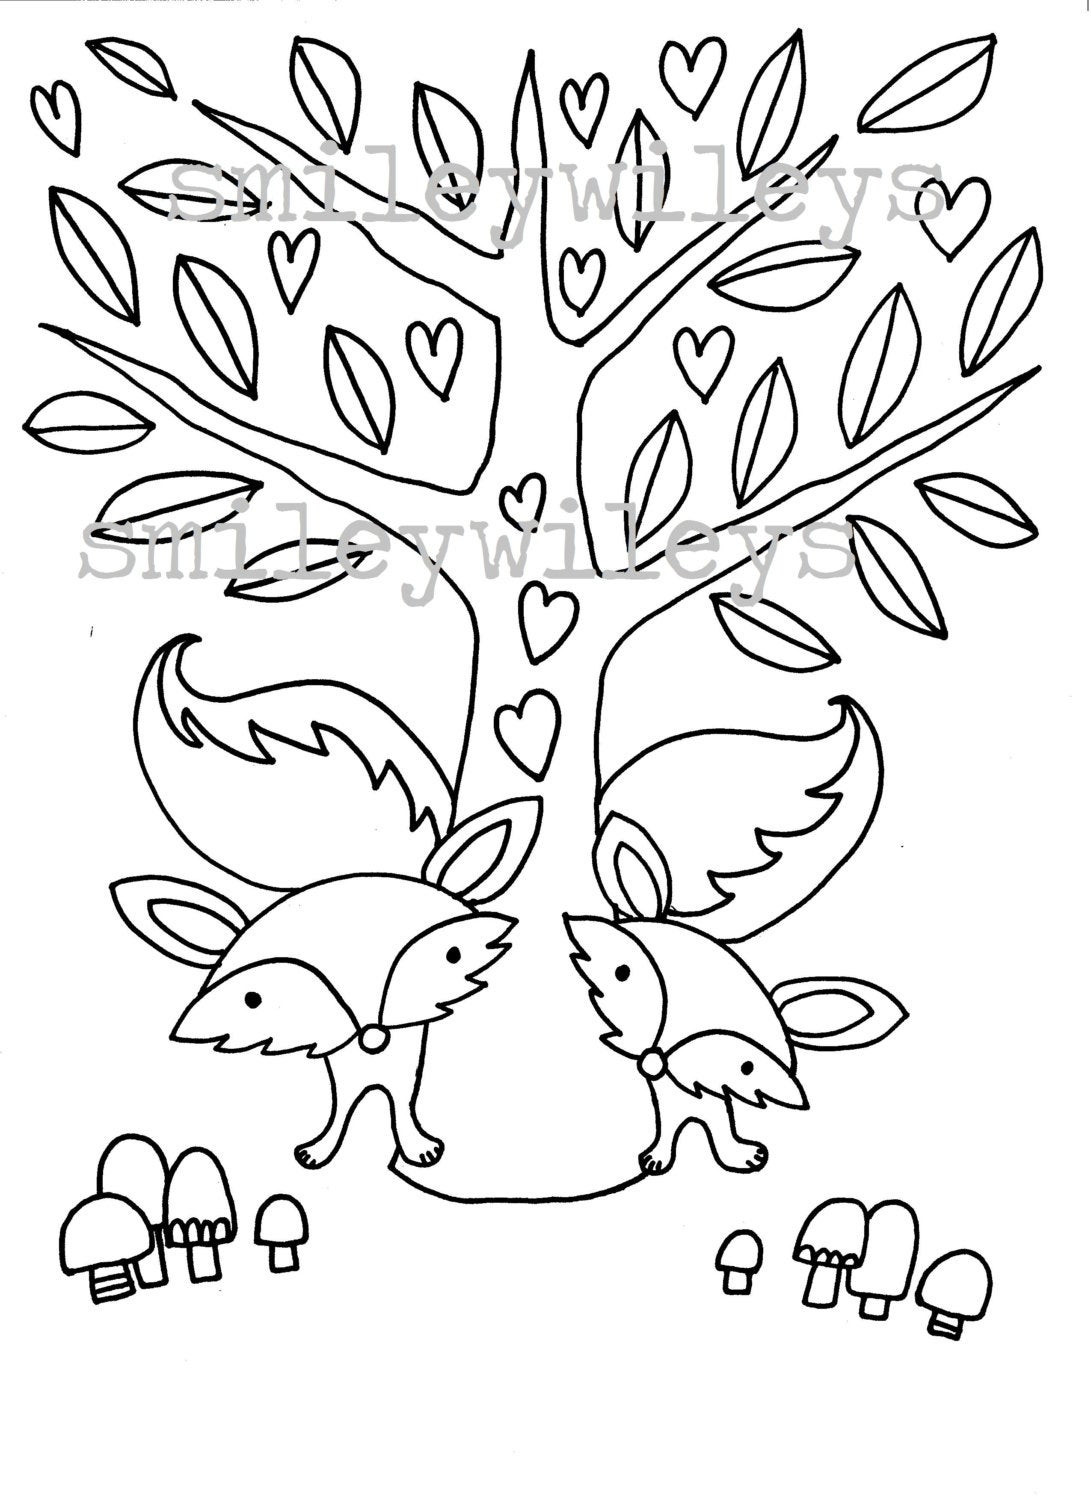 Coloring Pages For Kids Fox
 Animal Colouring Pages Fox and Bunny Colouring by smileywileys